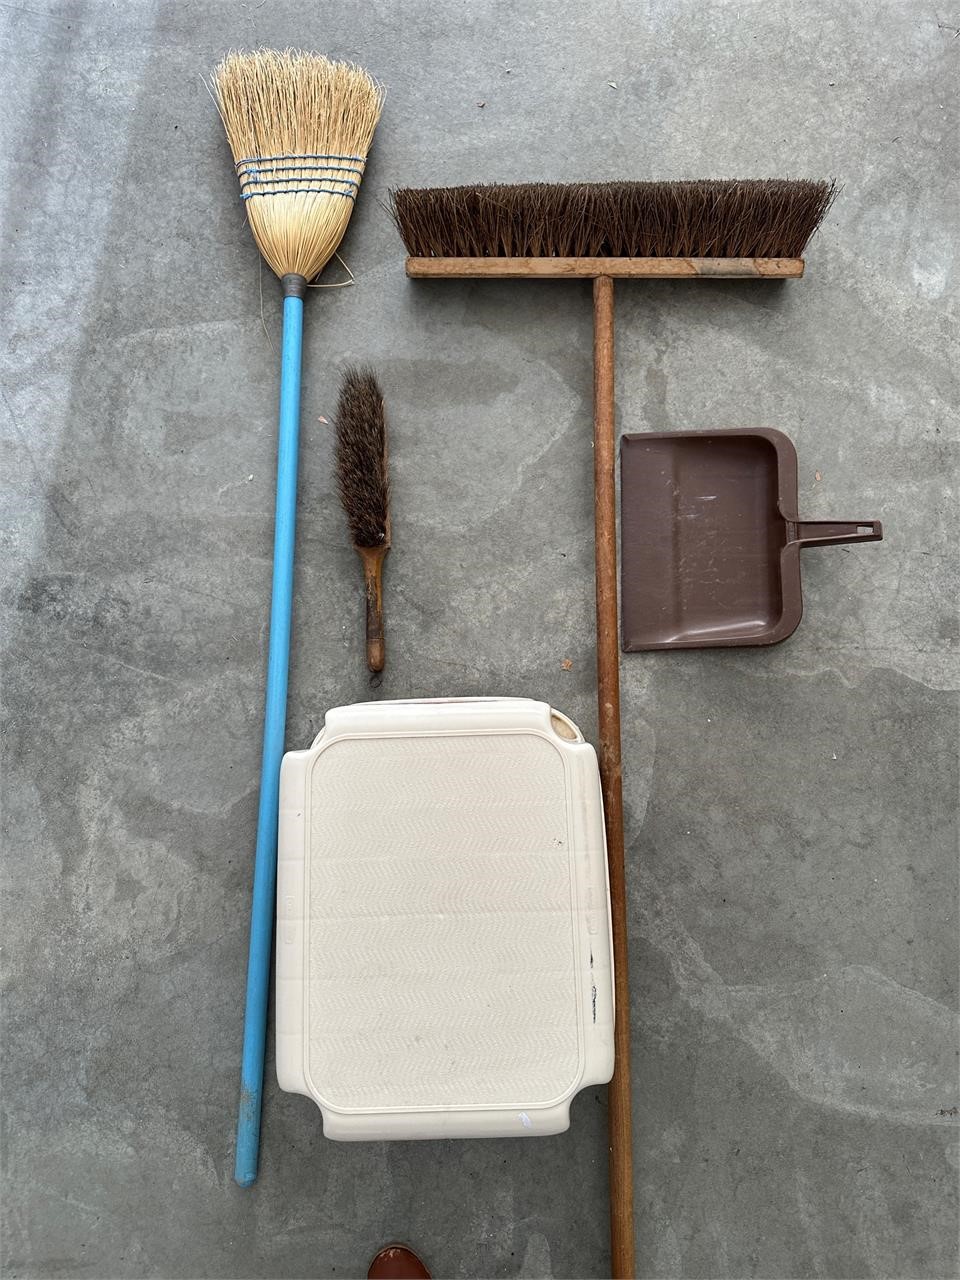 Brooms, Dustpan and Stool